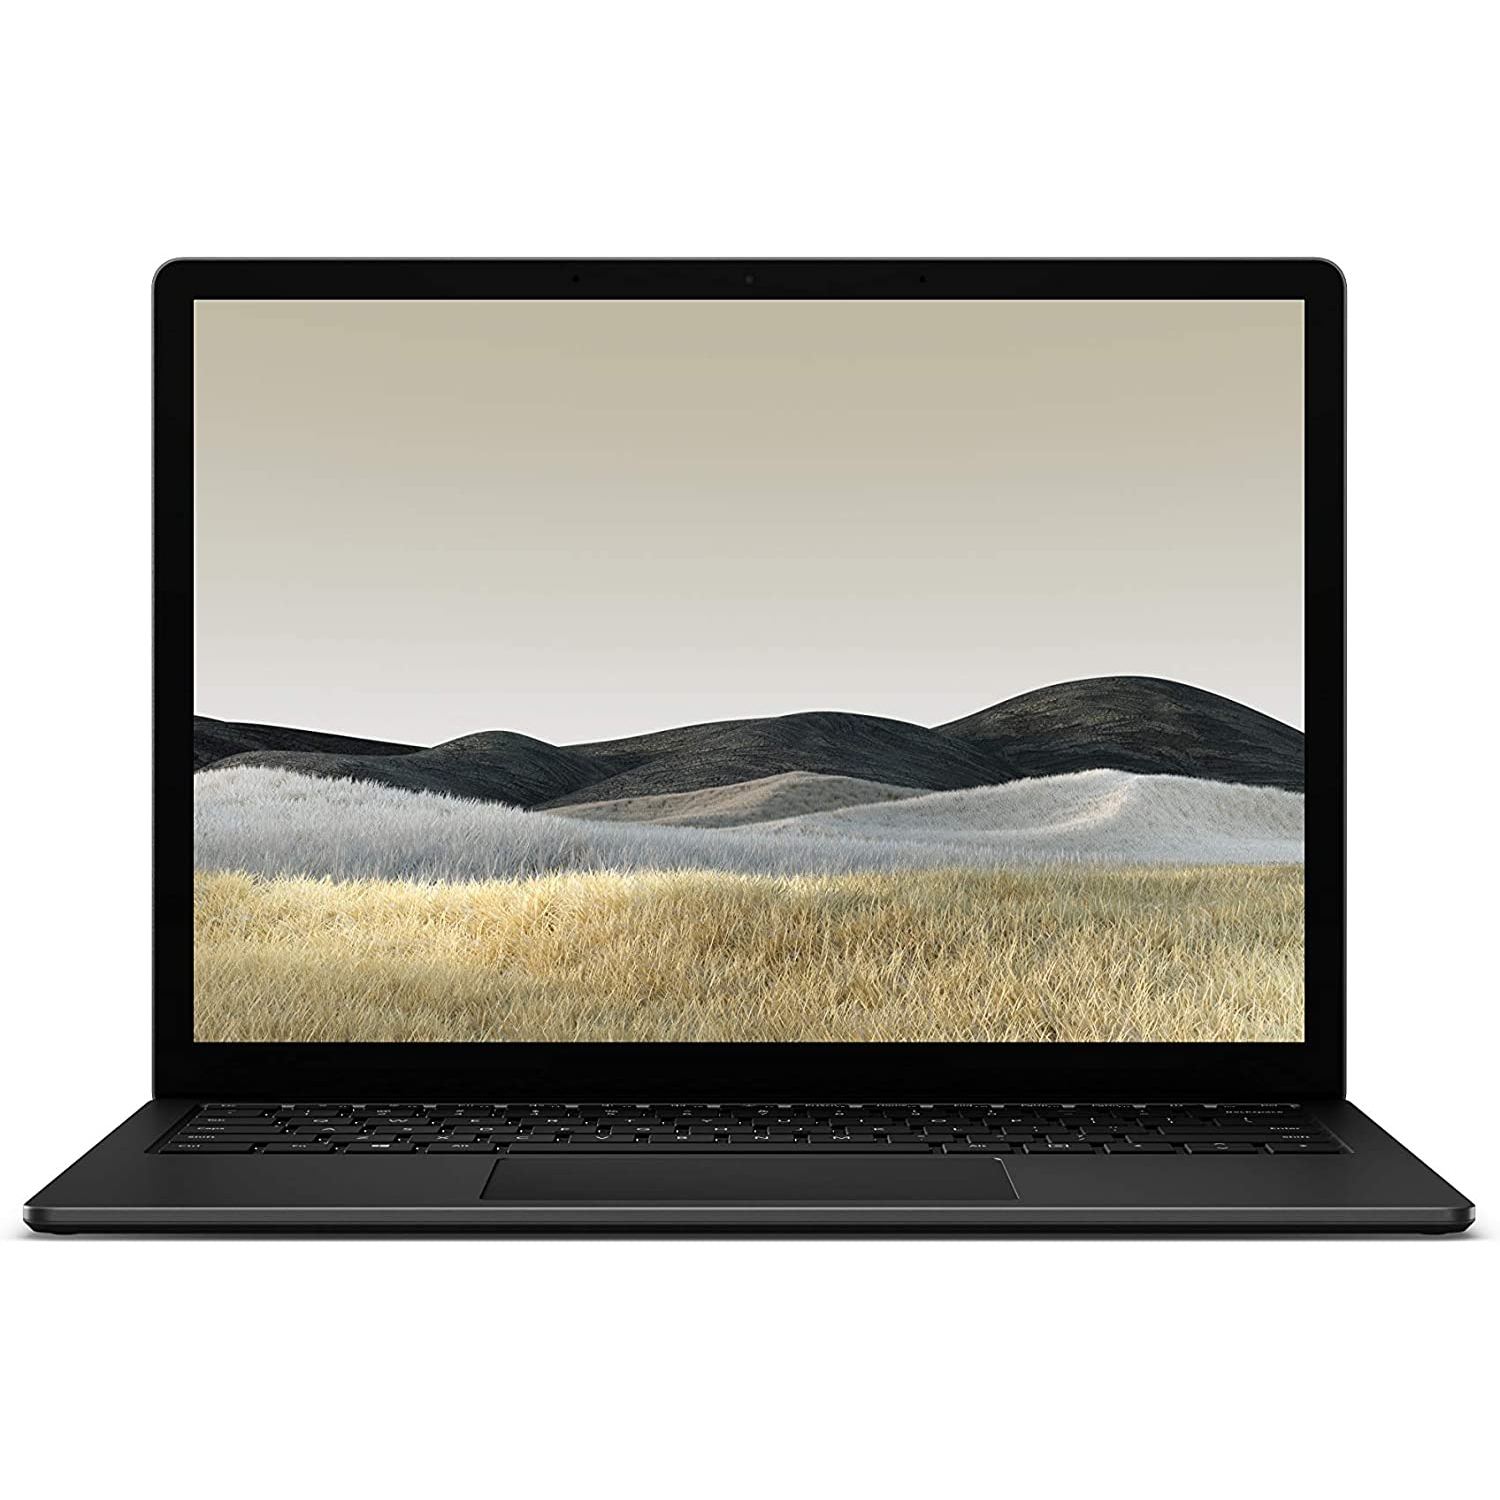 Refurbished (Excellent) Microsoft Surface Laptop 3 - Intel Core i5 1035G7 / 1.2 GHz - Win 10 Home 64-bit - 8 GB RAM - 256 GB SSD - 13.5" touchscreen - Wi-Fi 6 - Black